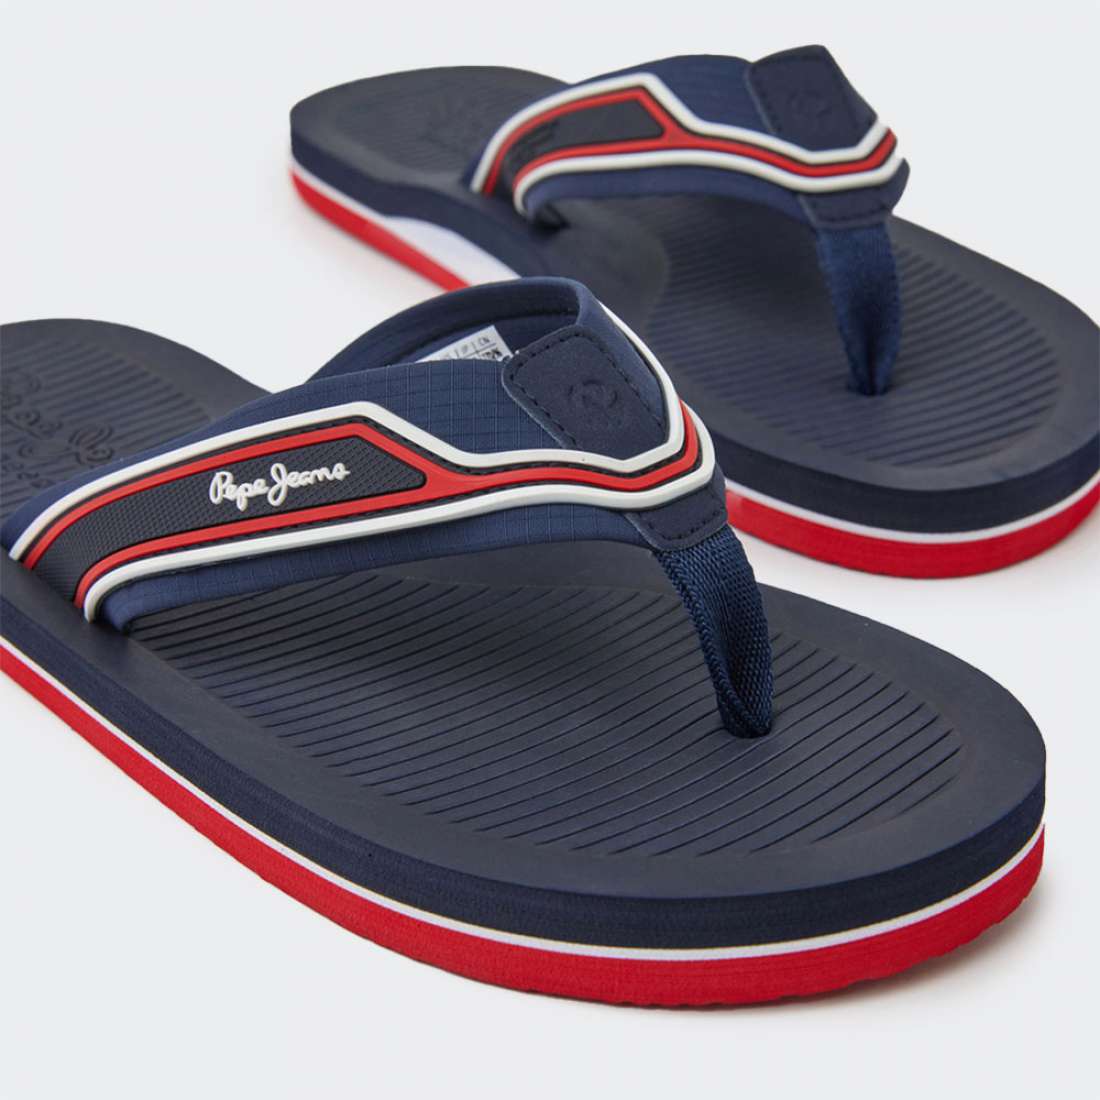 CHINELOS PEPE JEANS SOUTH BEACH 2.0 NAVY